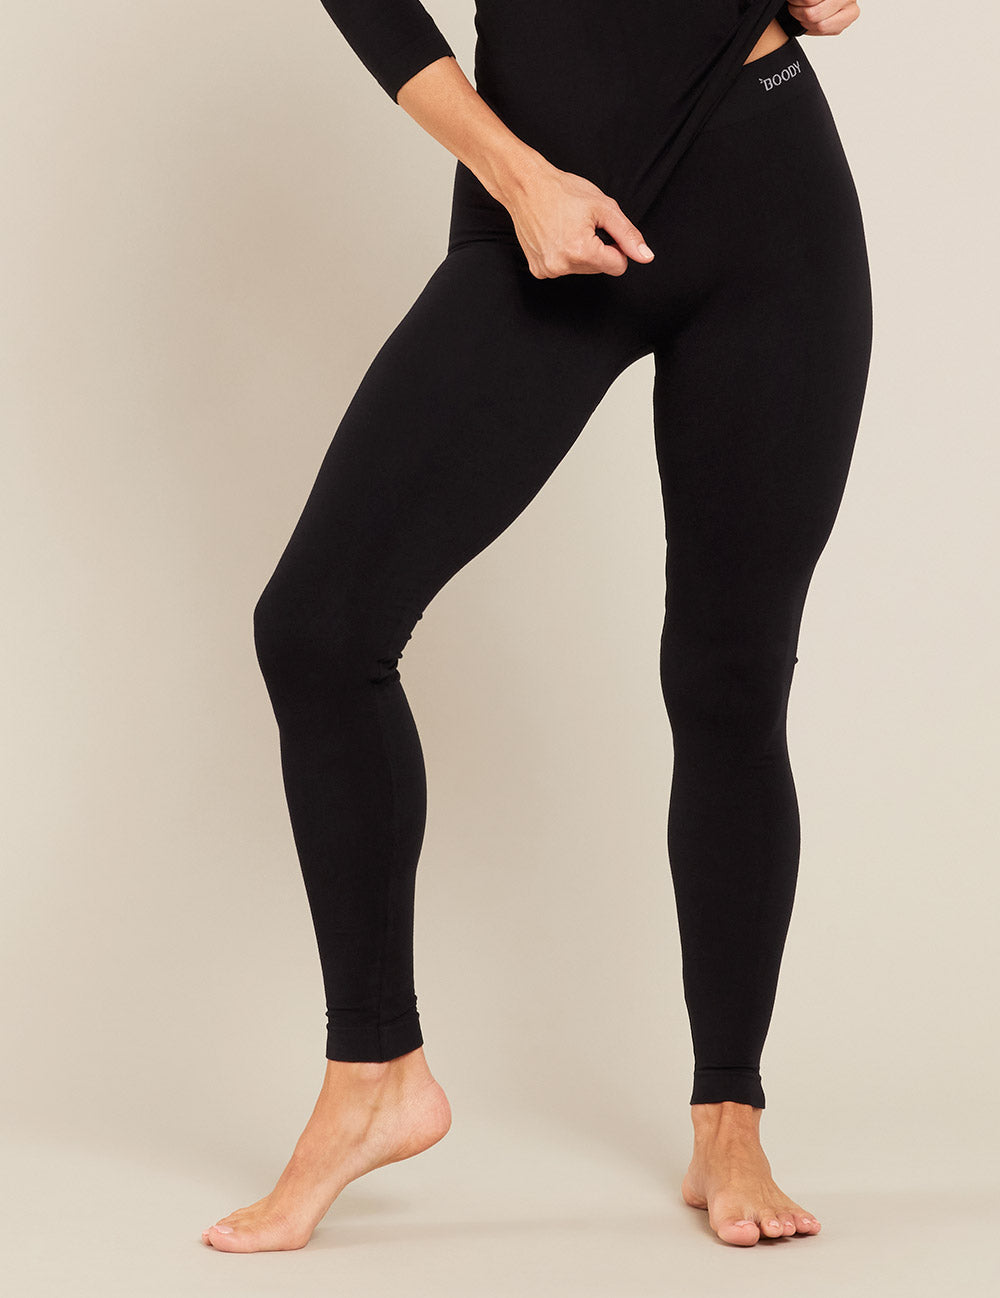 Buy Comfort Lady Women's Slim Fit Leggings (Pack of 2)(Lng-001_Black &  White_Free Size) at